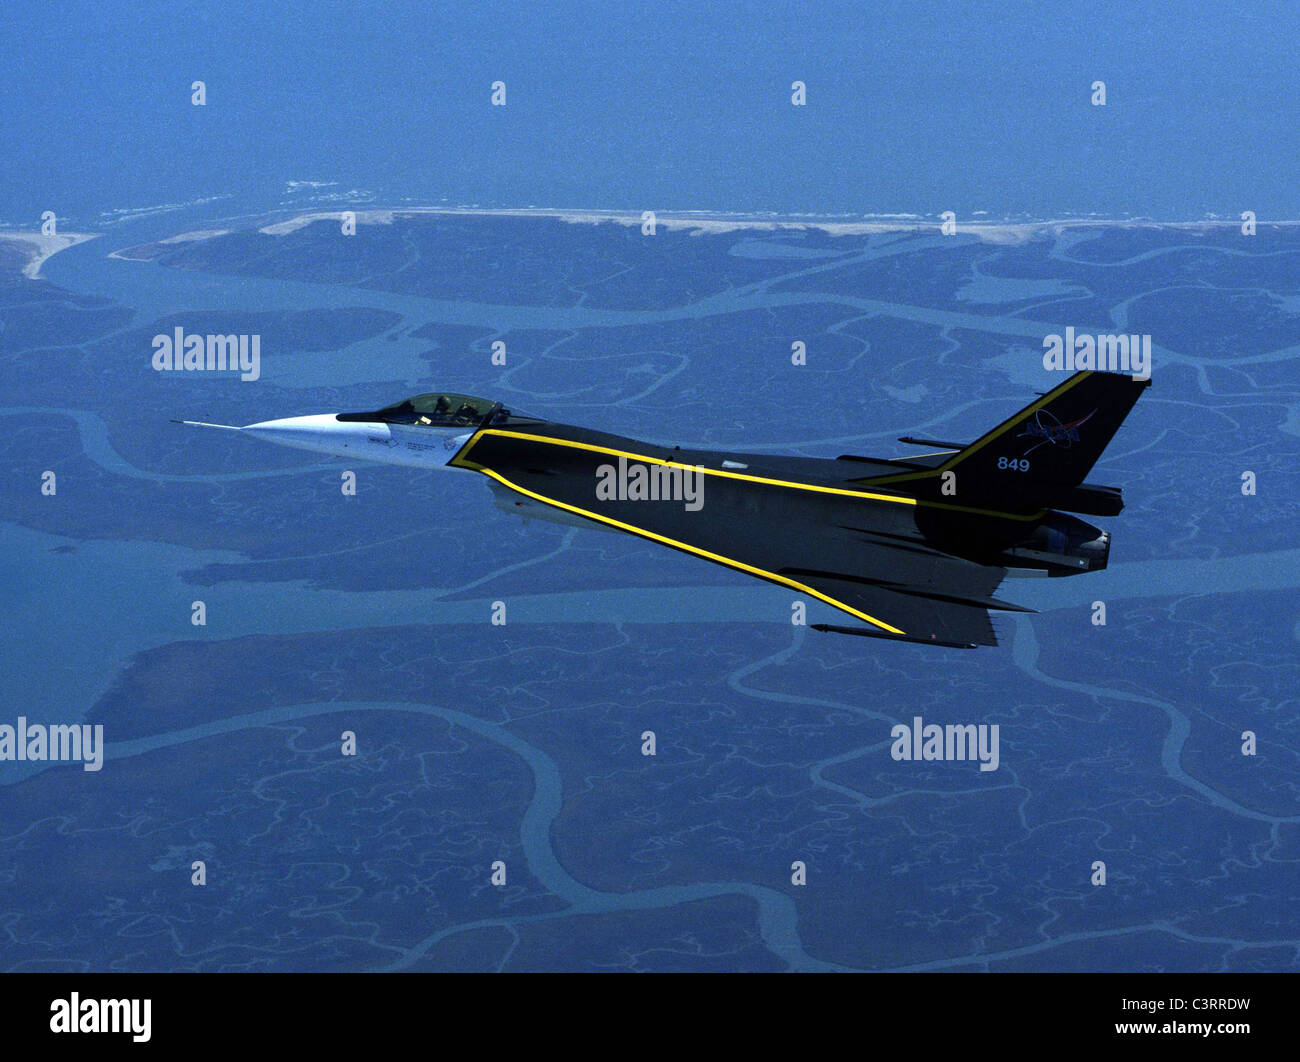 The NASA F-16XL research airplane is shown in flight Stock Photo